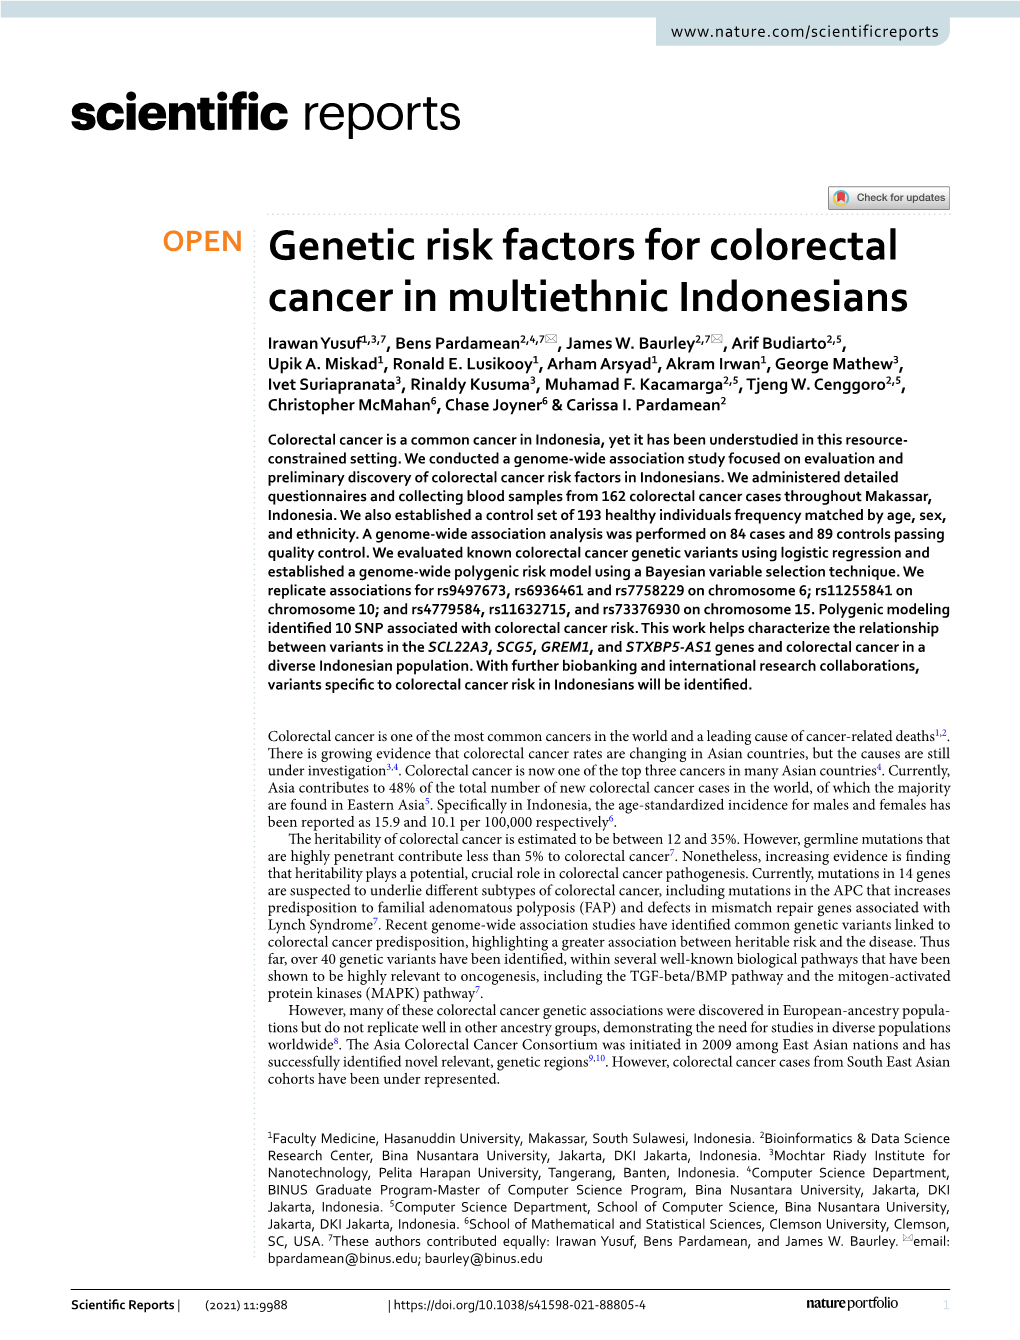 Genetic Risk Factors for Colorectal Cancer in Multiethnic Indonesians Irawan Yusuf1,3,7, Bens Pardamean2,4,7*, James W